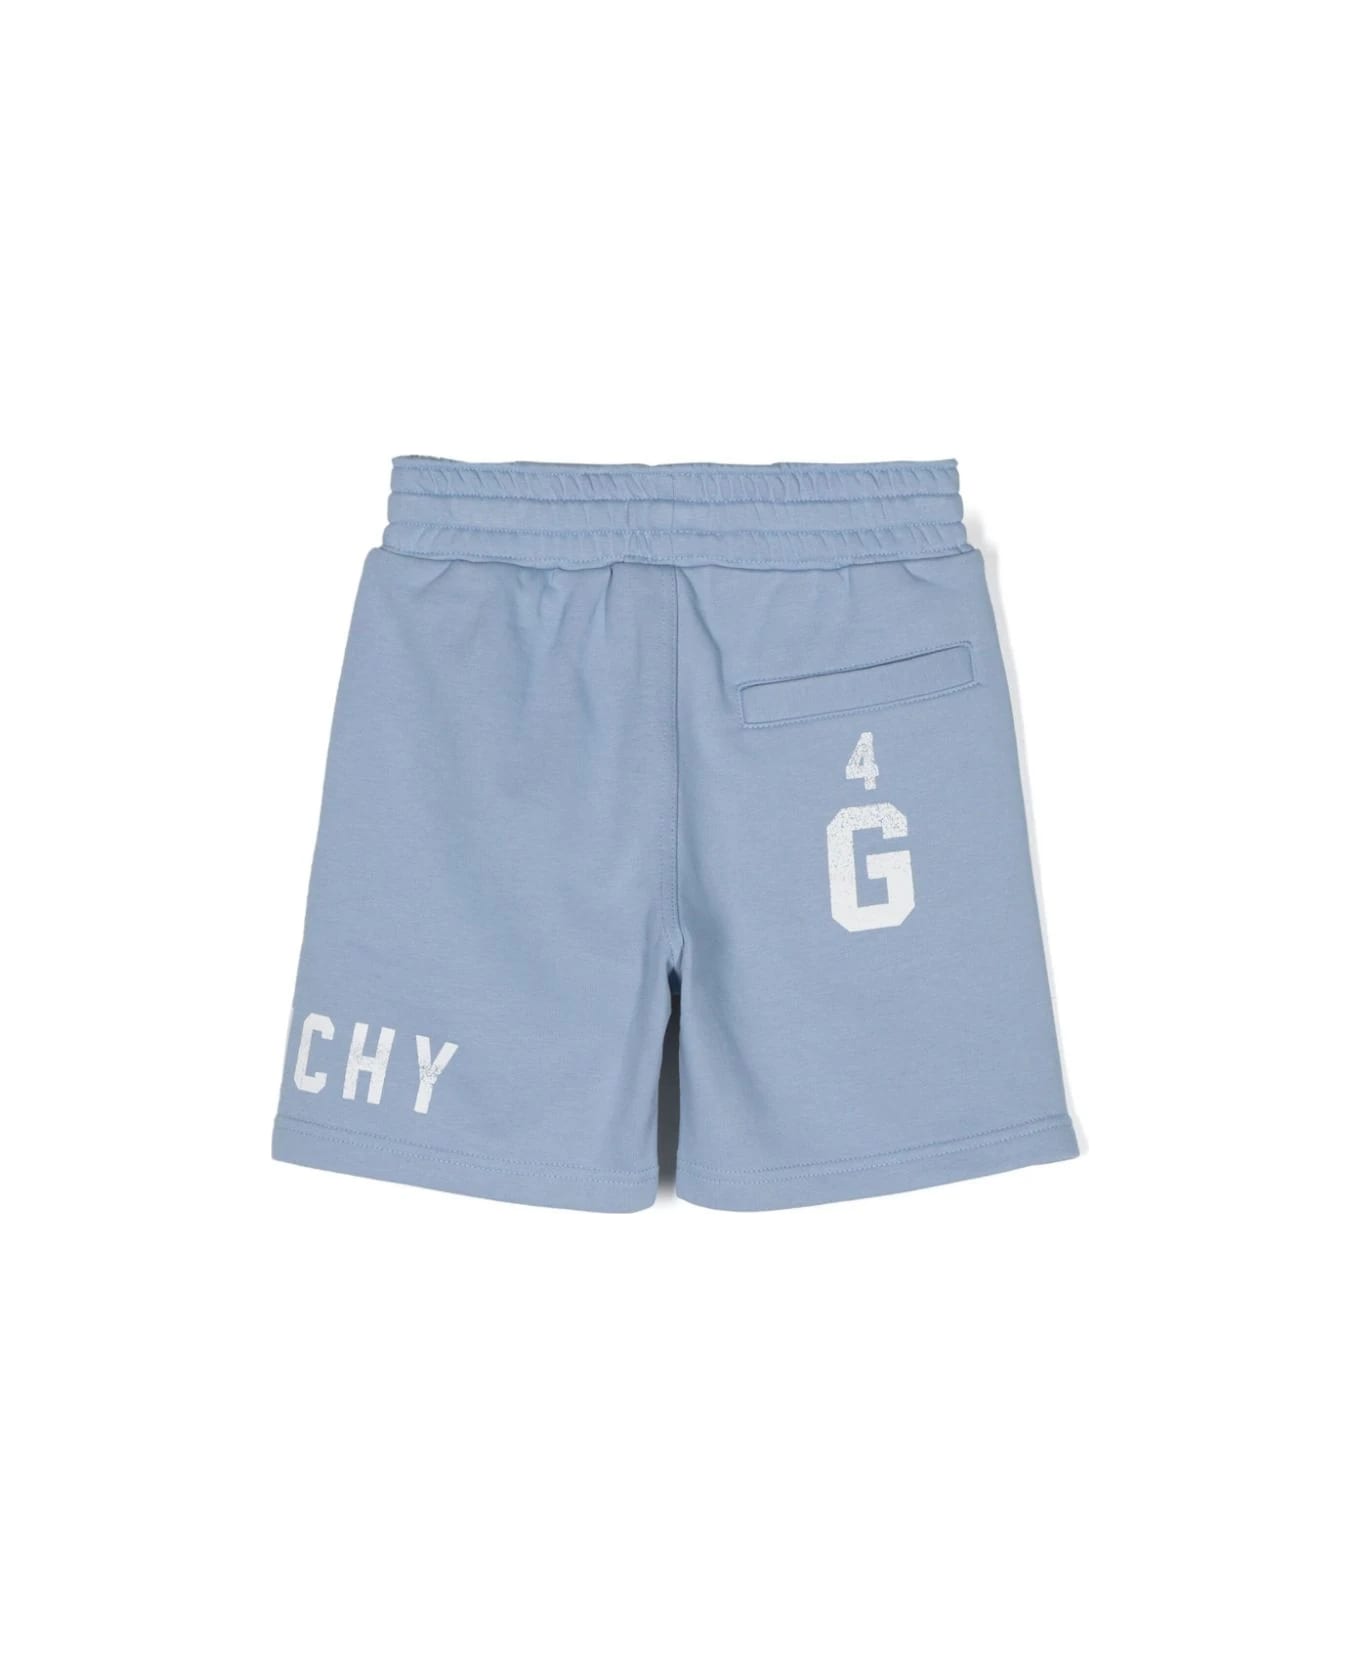 Givenchy Shorts With Print - Light blue